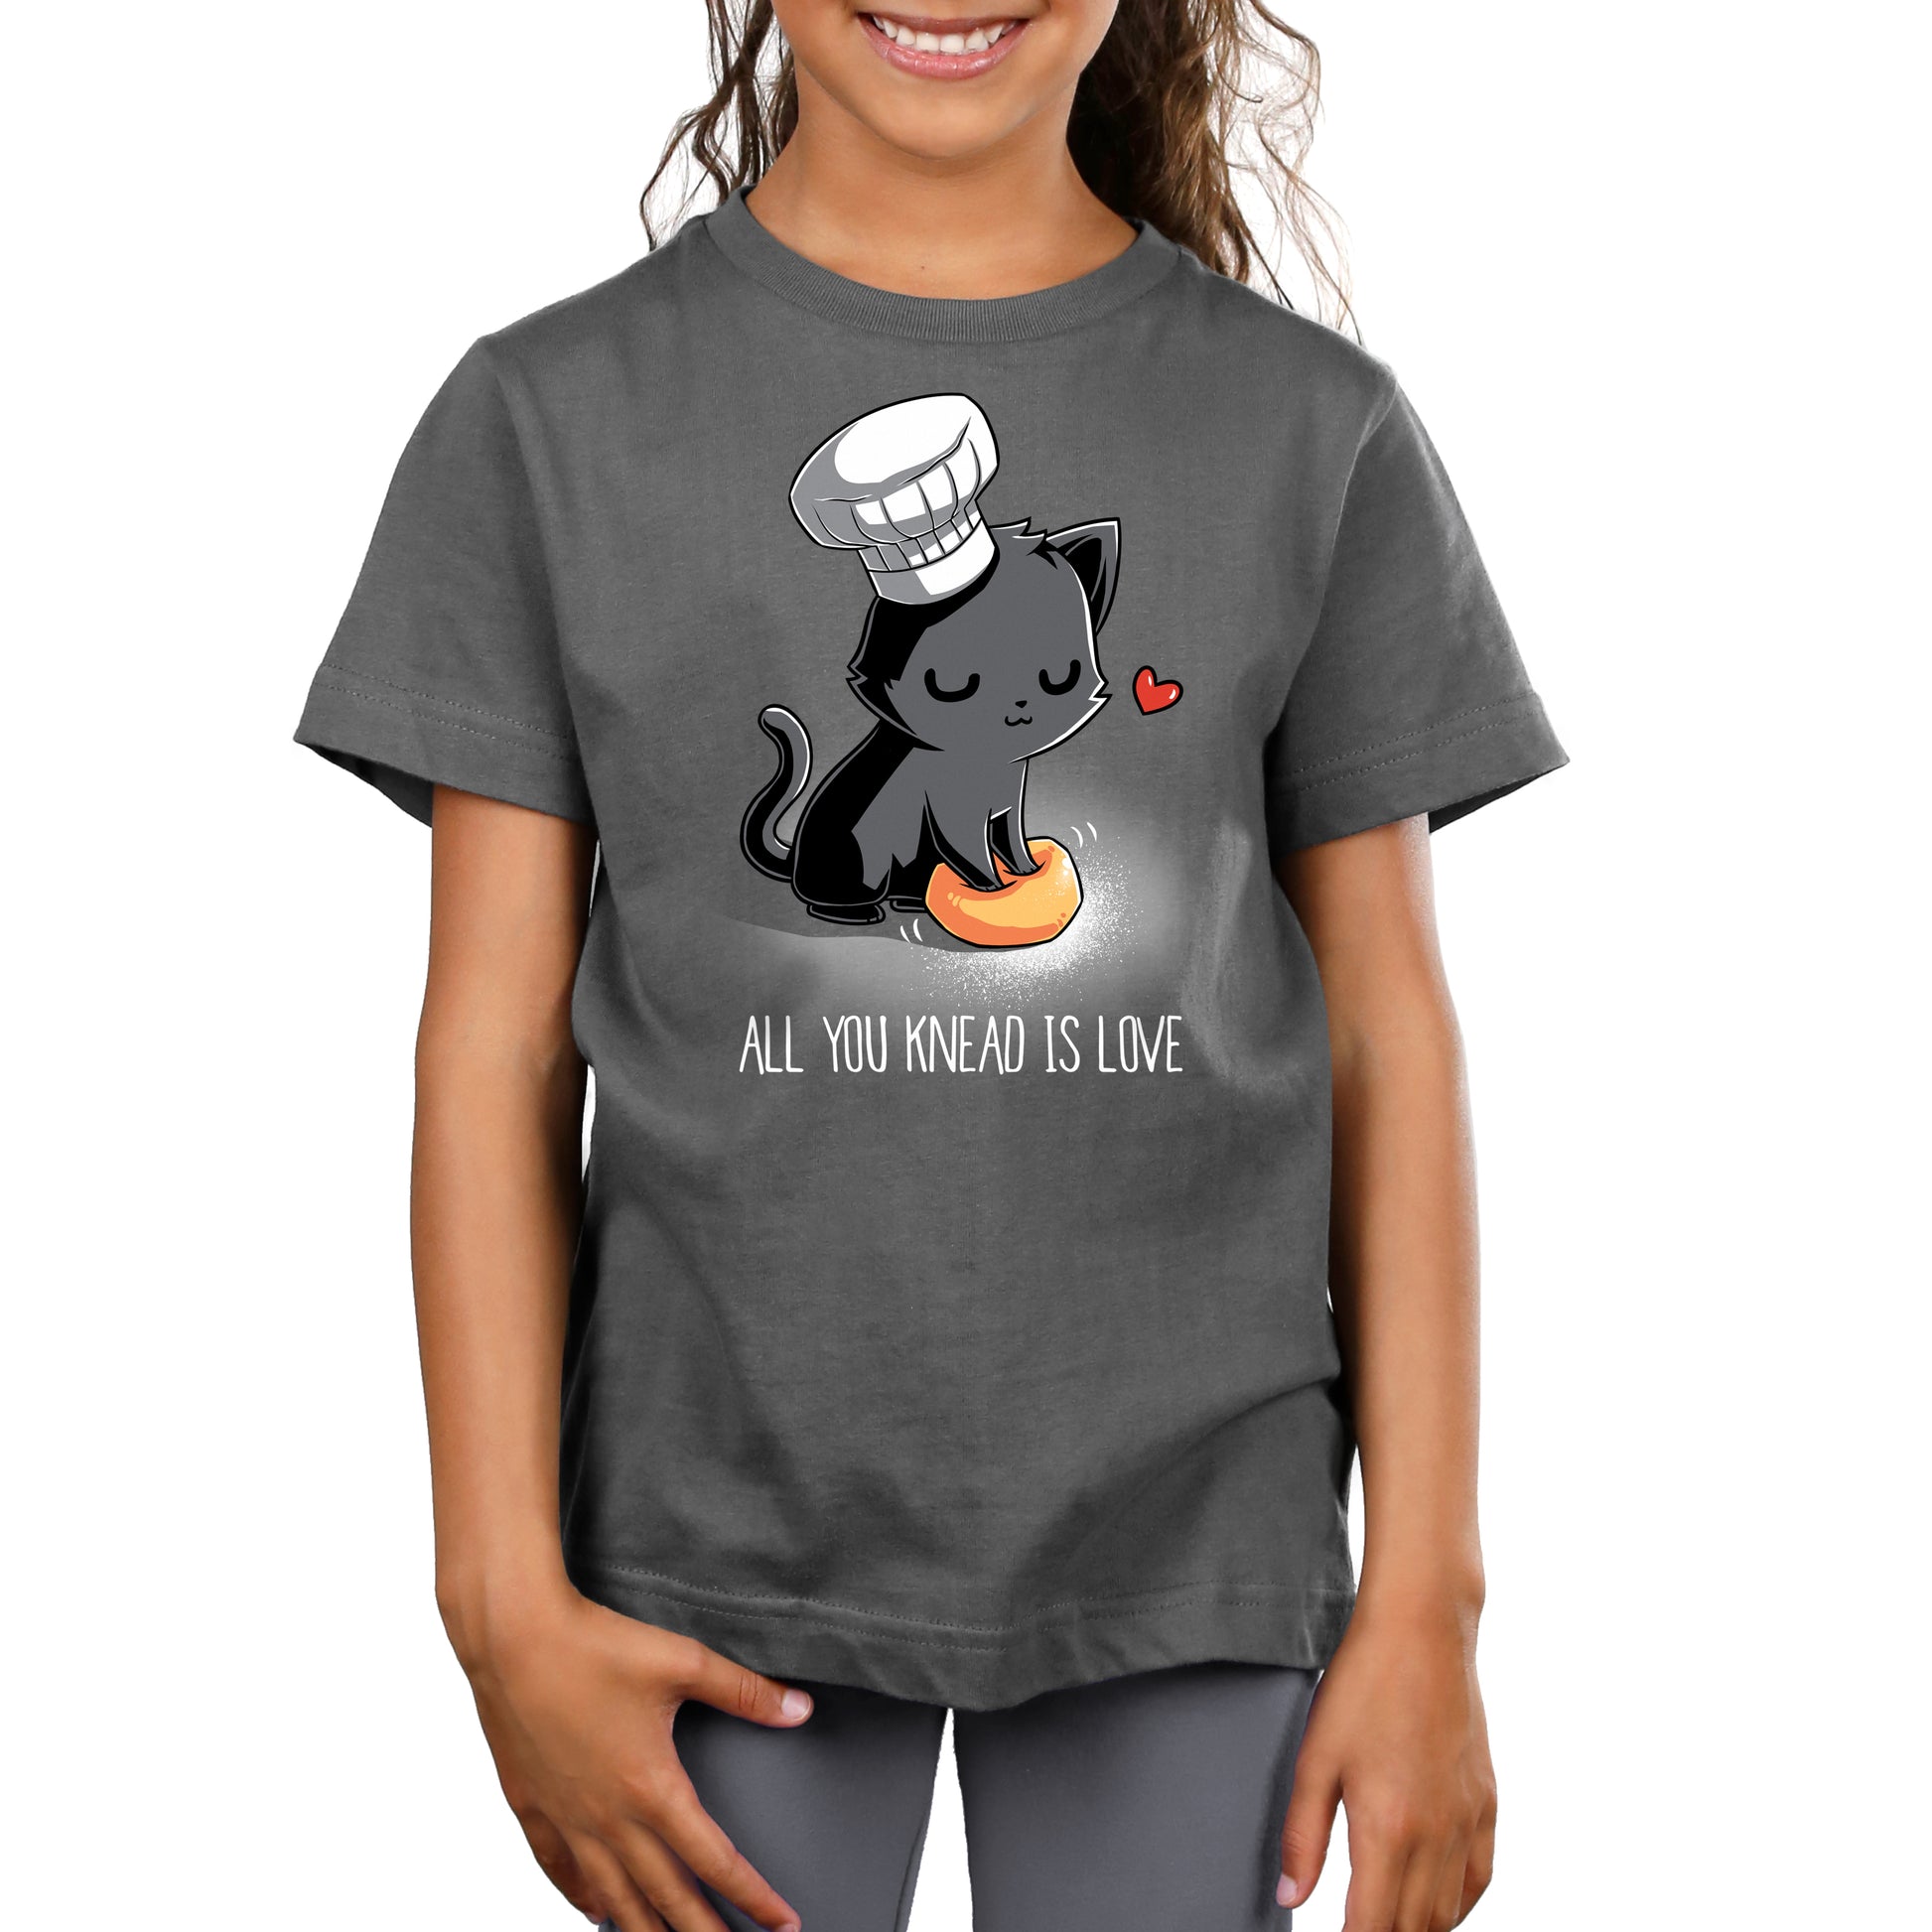 A girl wearing a charcoal gray All You Knead Is Love T-shirt by TeeTurtle.